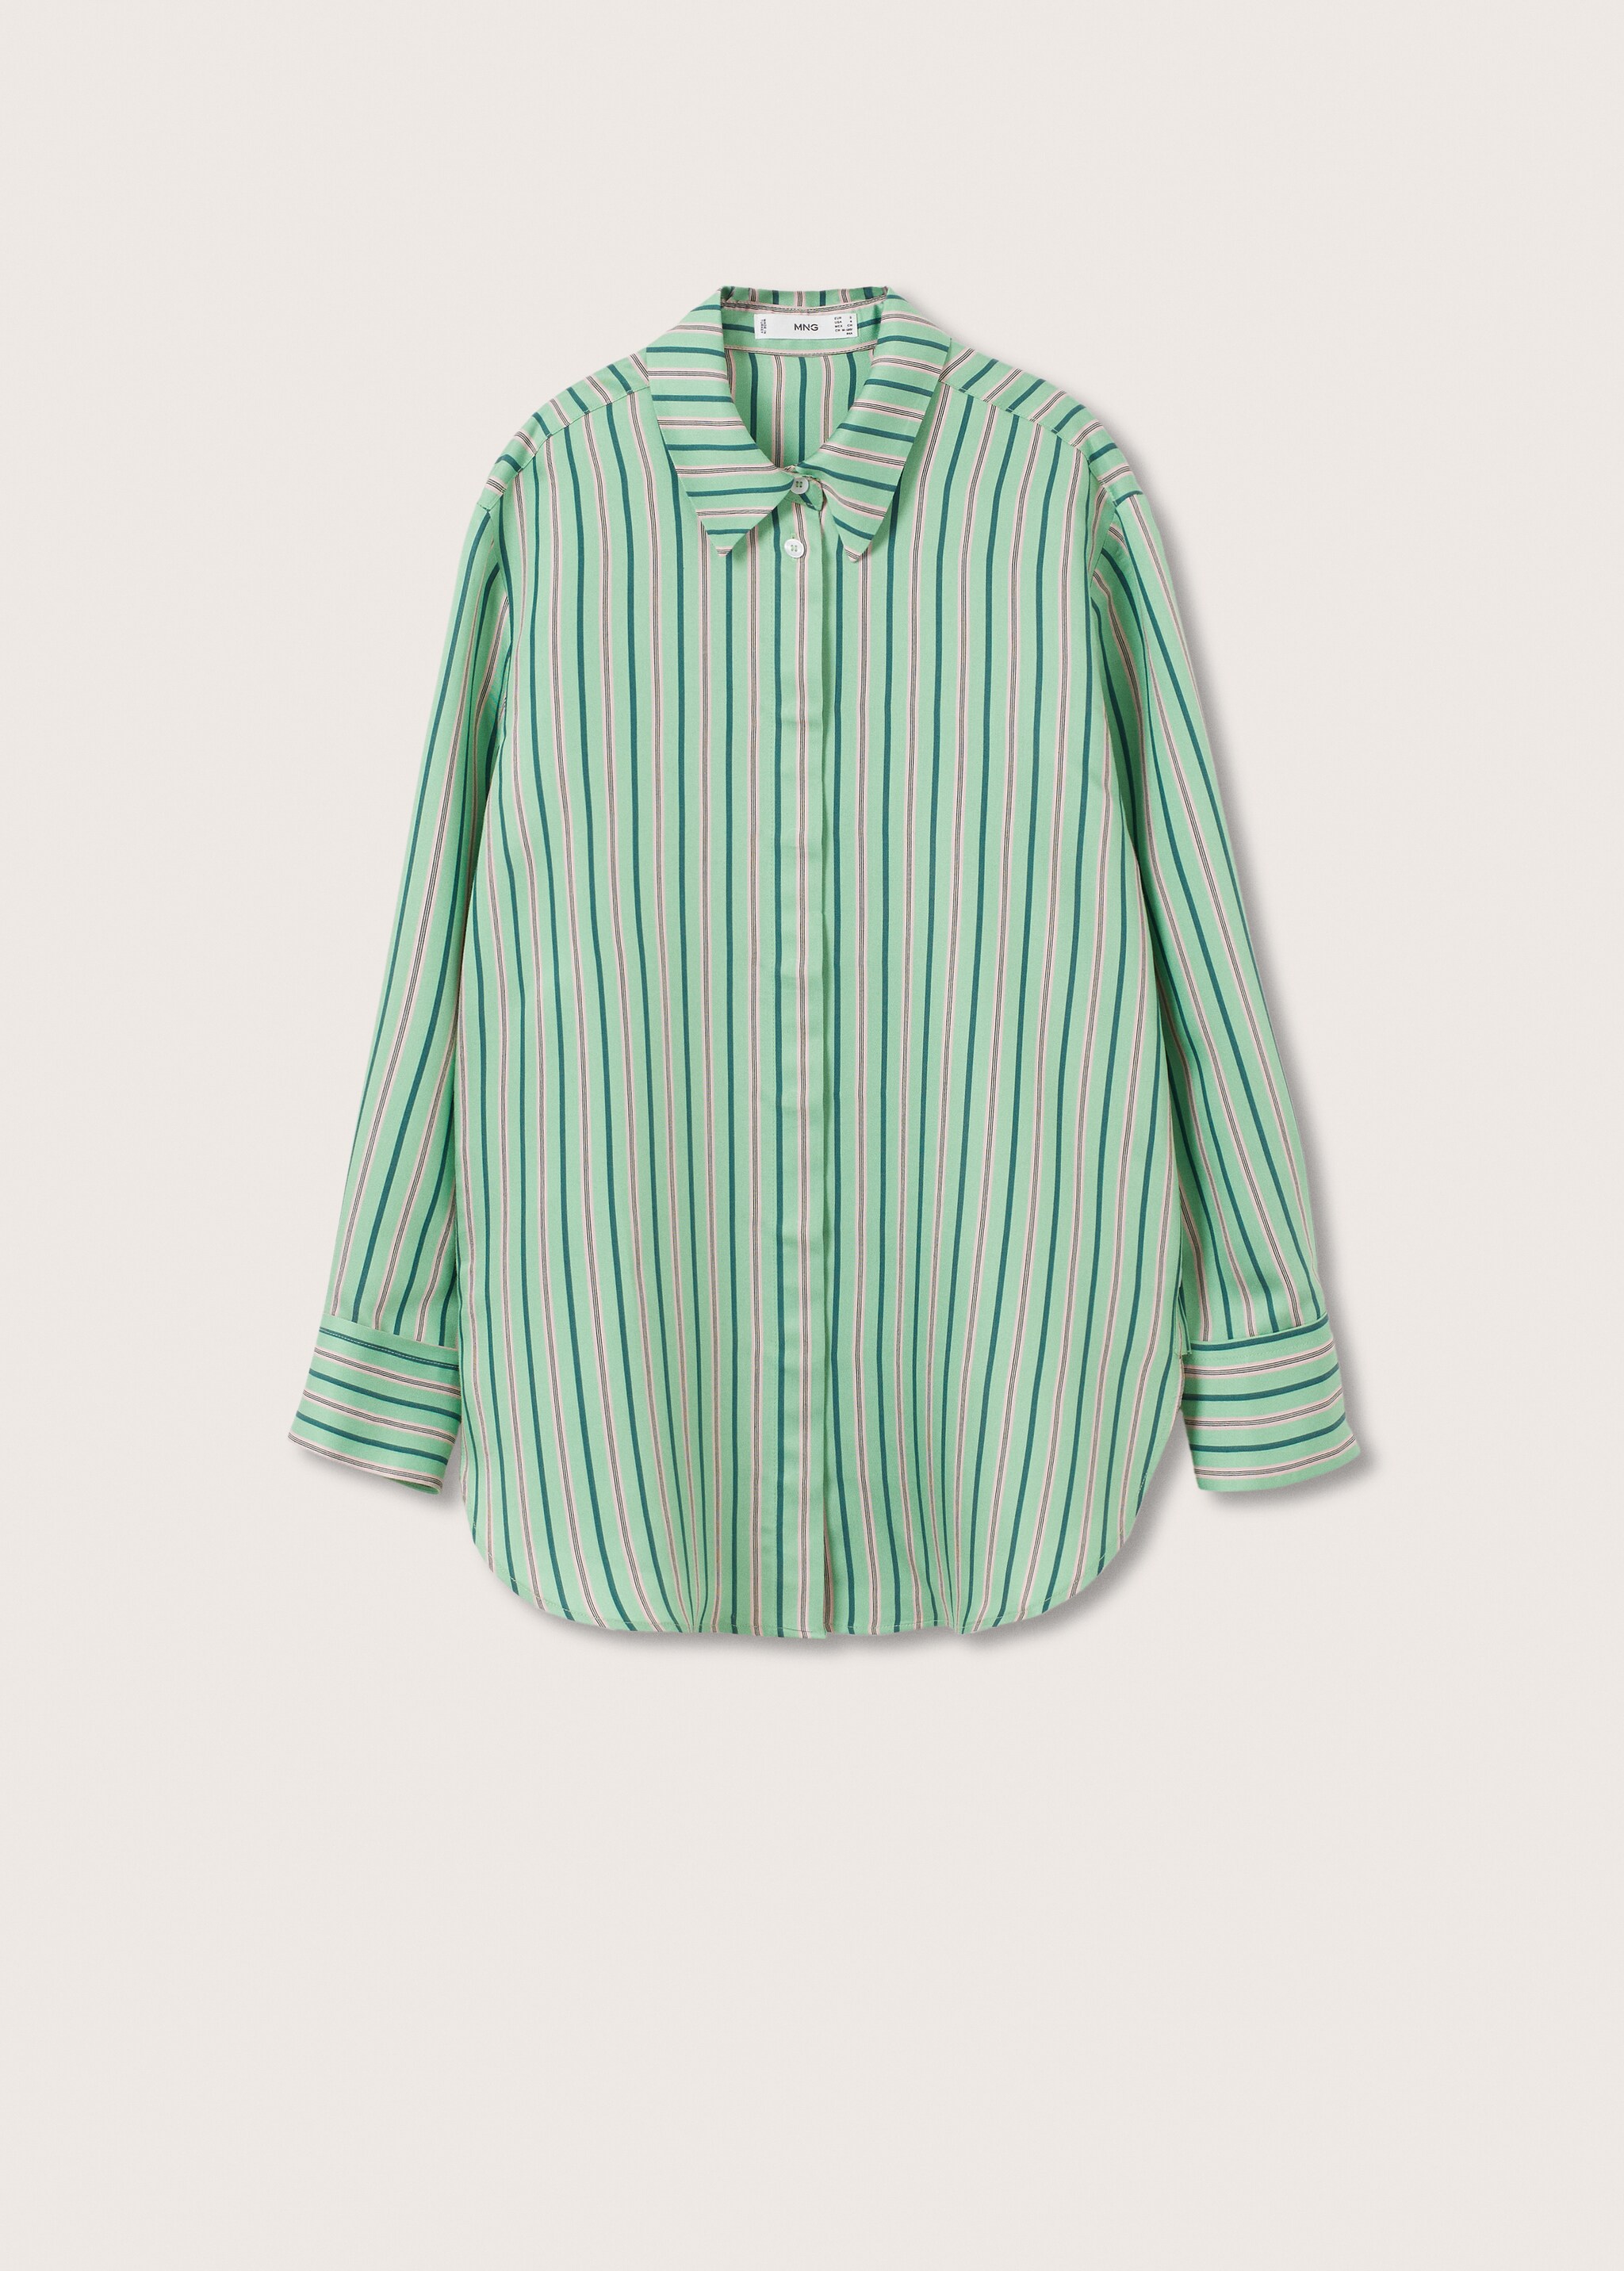 Buttoned striped shirt - Article without model